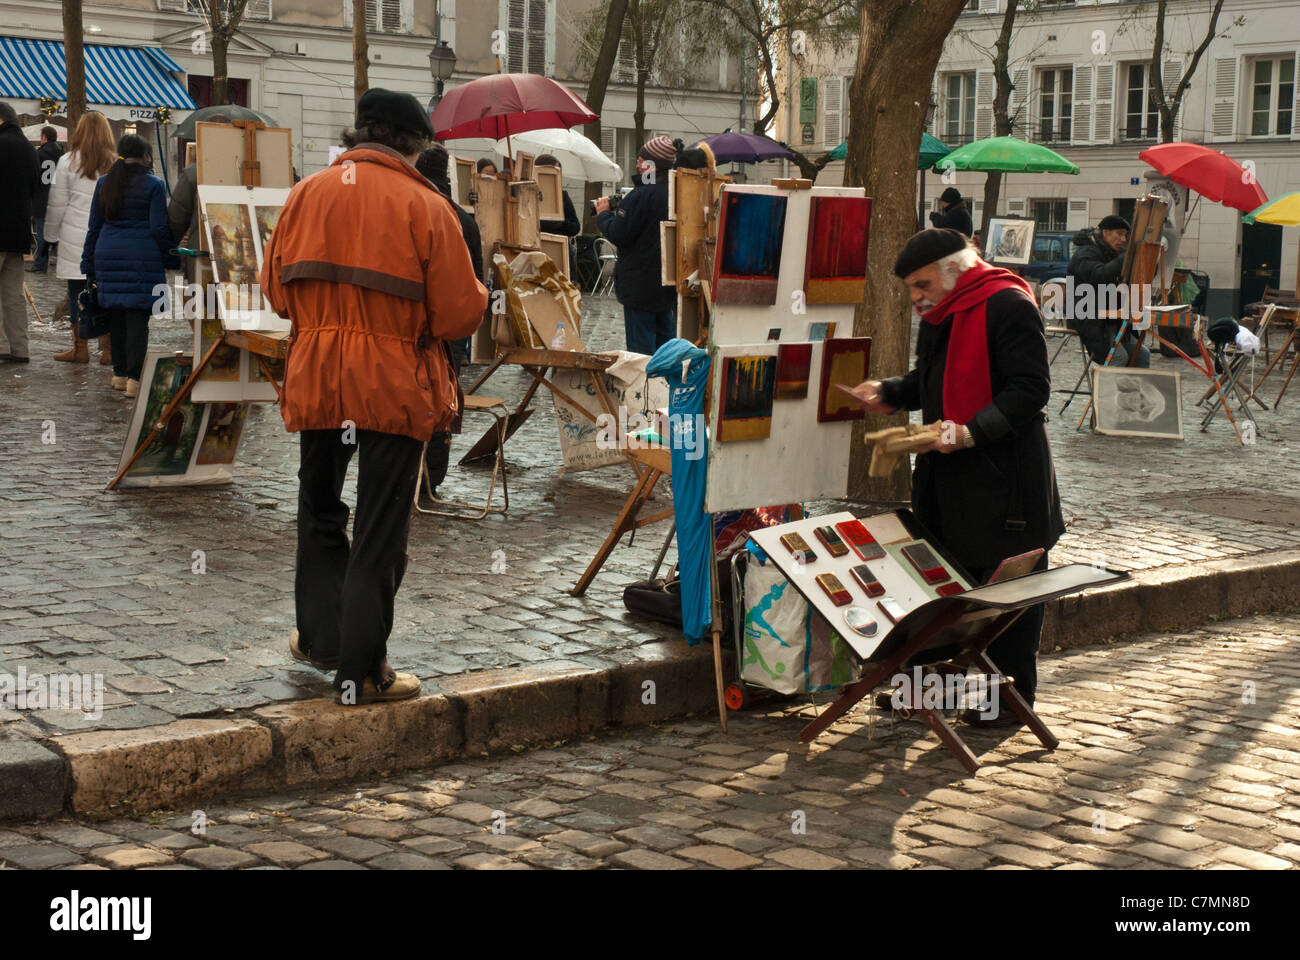 Atmospheric and colorful autumn street scene. Local artist setting up stall to sell paintings, with colorful umbrellas Stock Photo